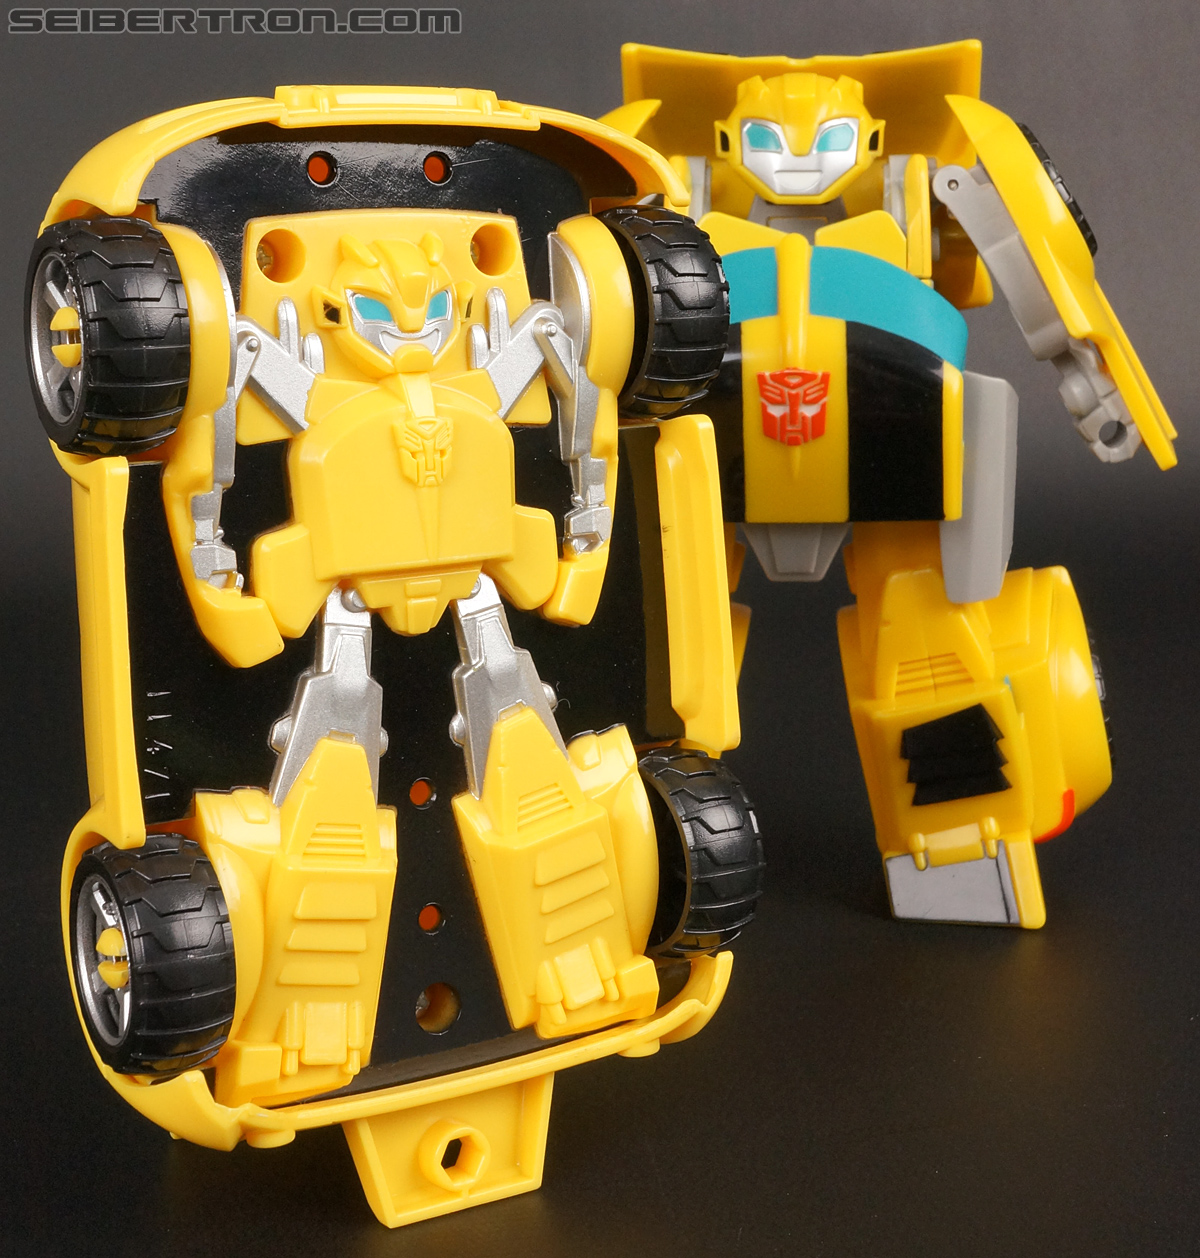 Transformers Rescue Bots Bumblebee (Bumblebee Rescue Garage) (Image #74 of 78)